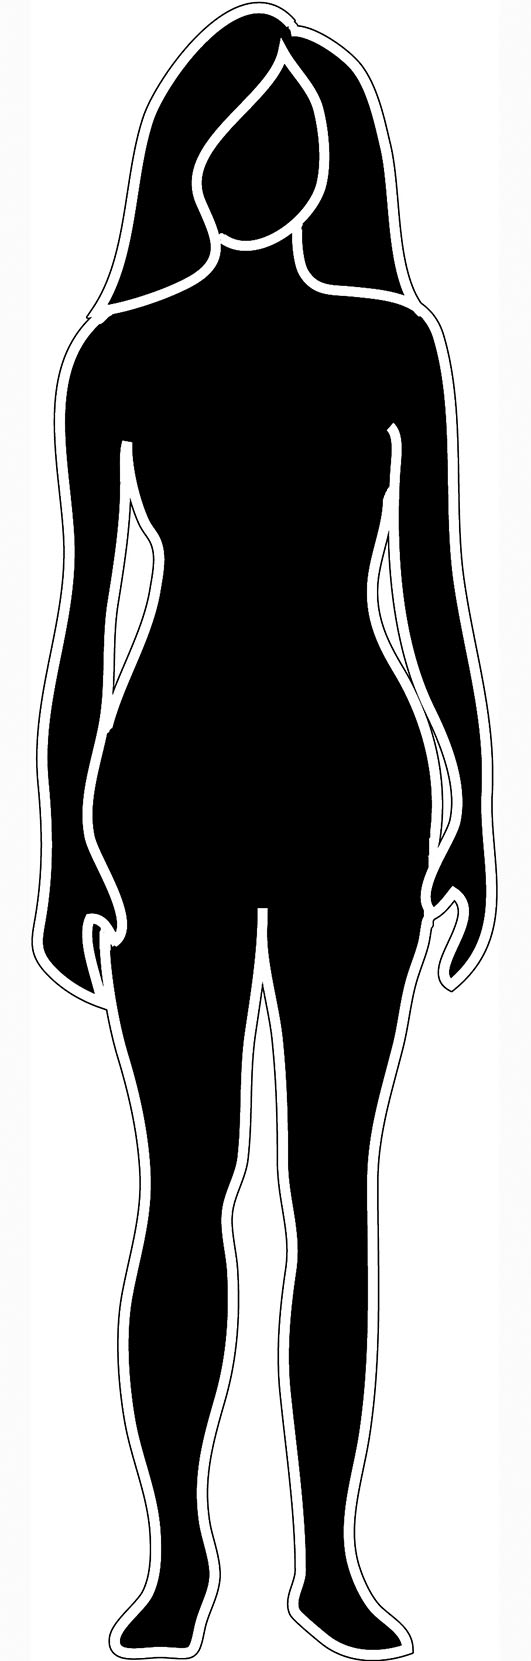 printable-outline-of-female-human-body-front-and-back-goimages-web